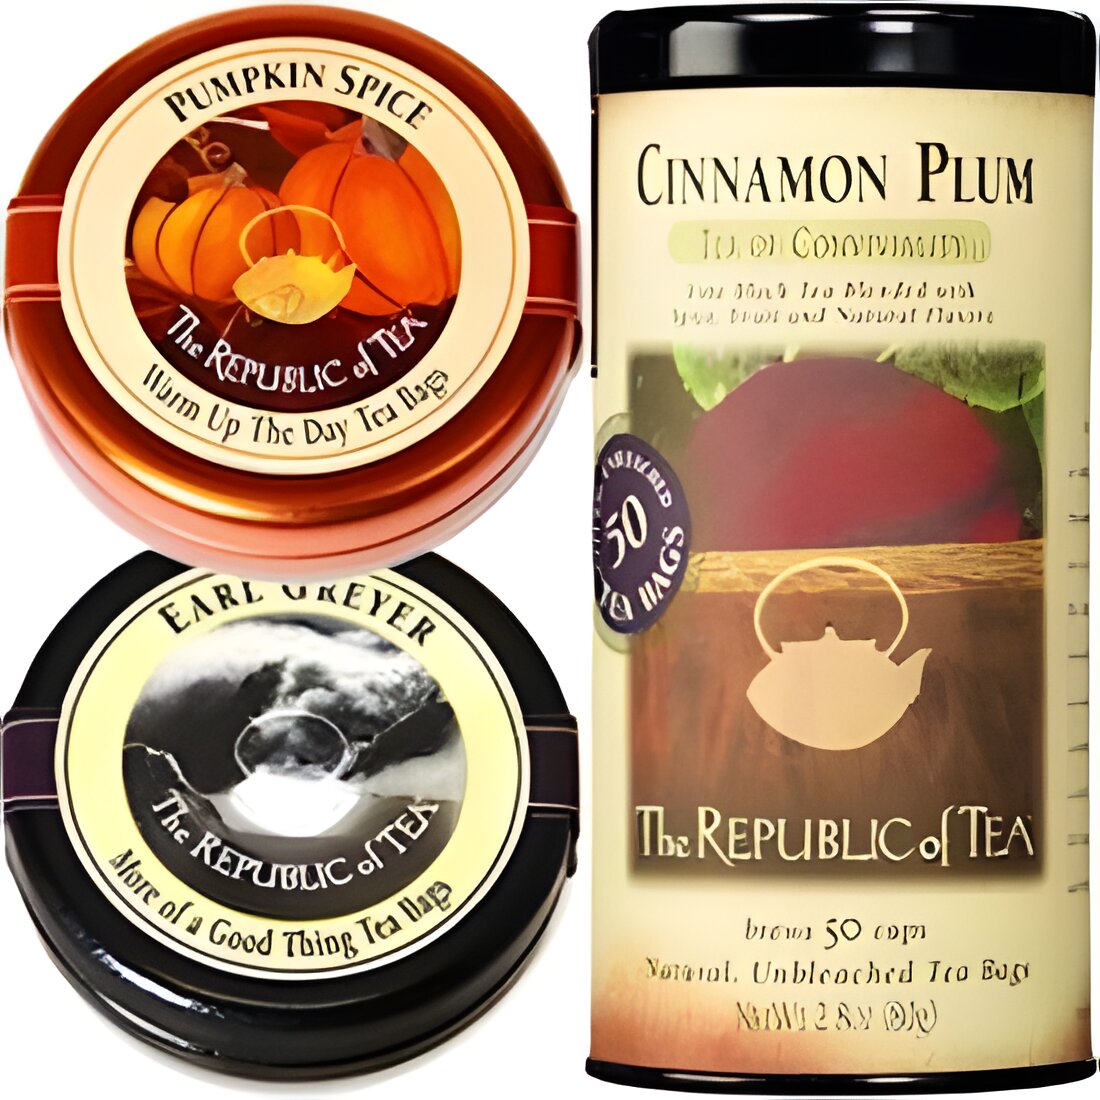 Free Tea Samples by The Republic of Tea